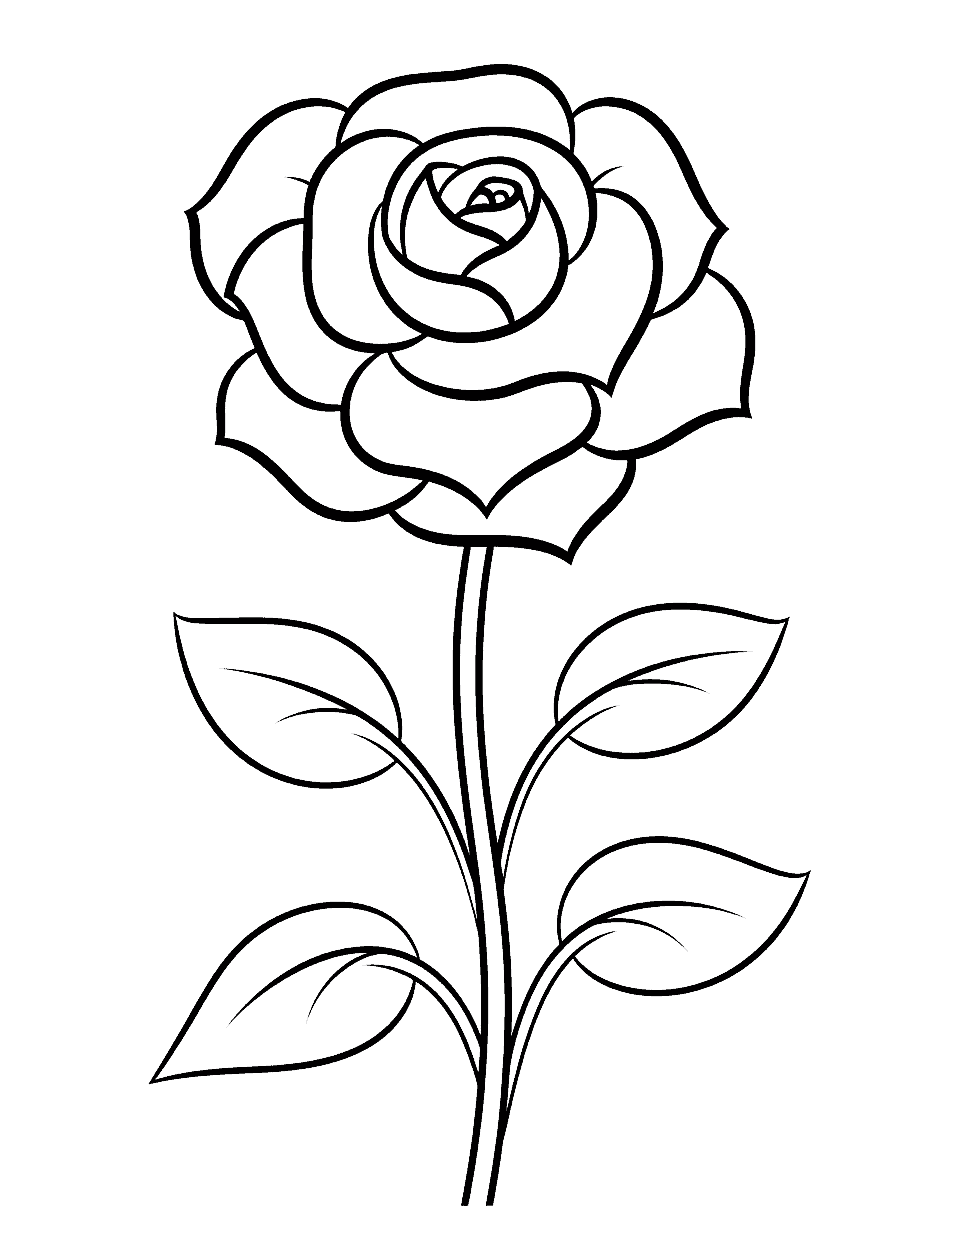 Simple Rose for Preschool Flower Coloring Page - A simplified, large rose design perfect for preschoolers.